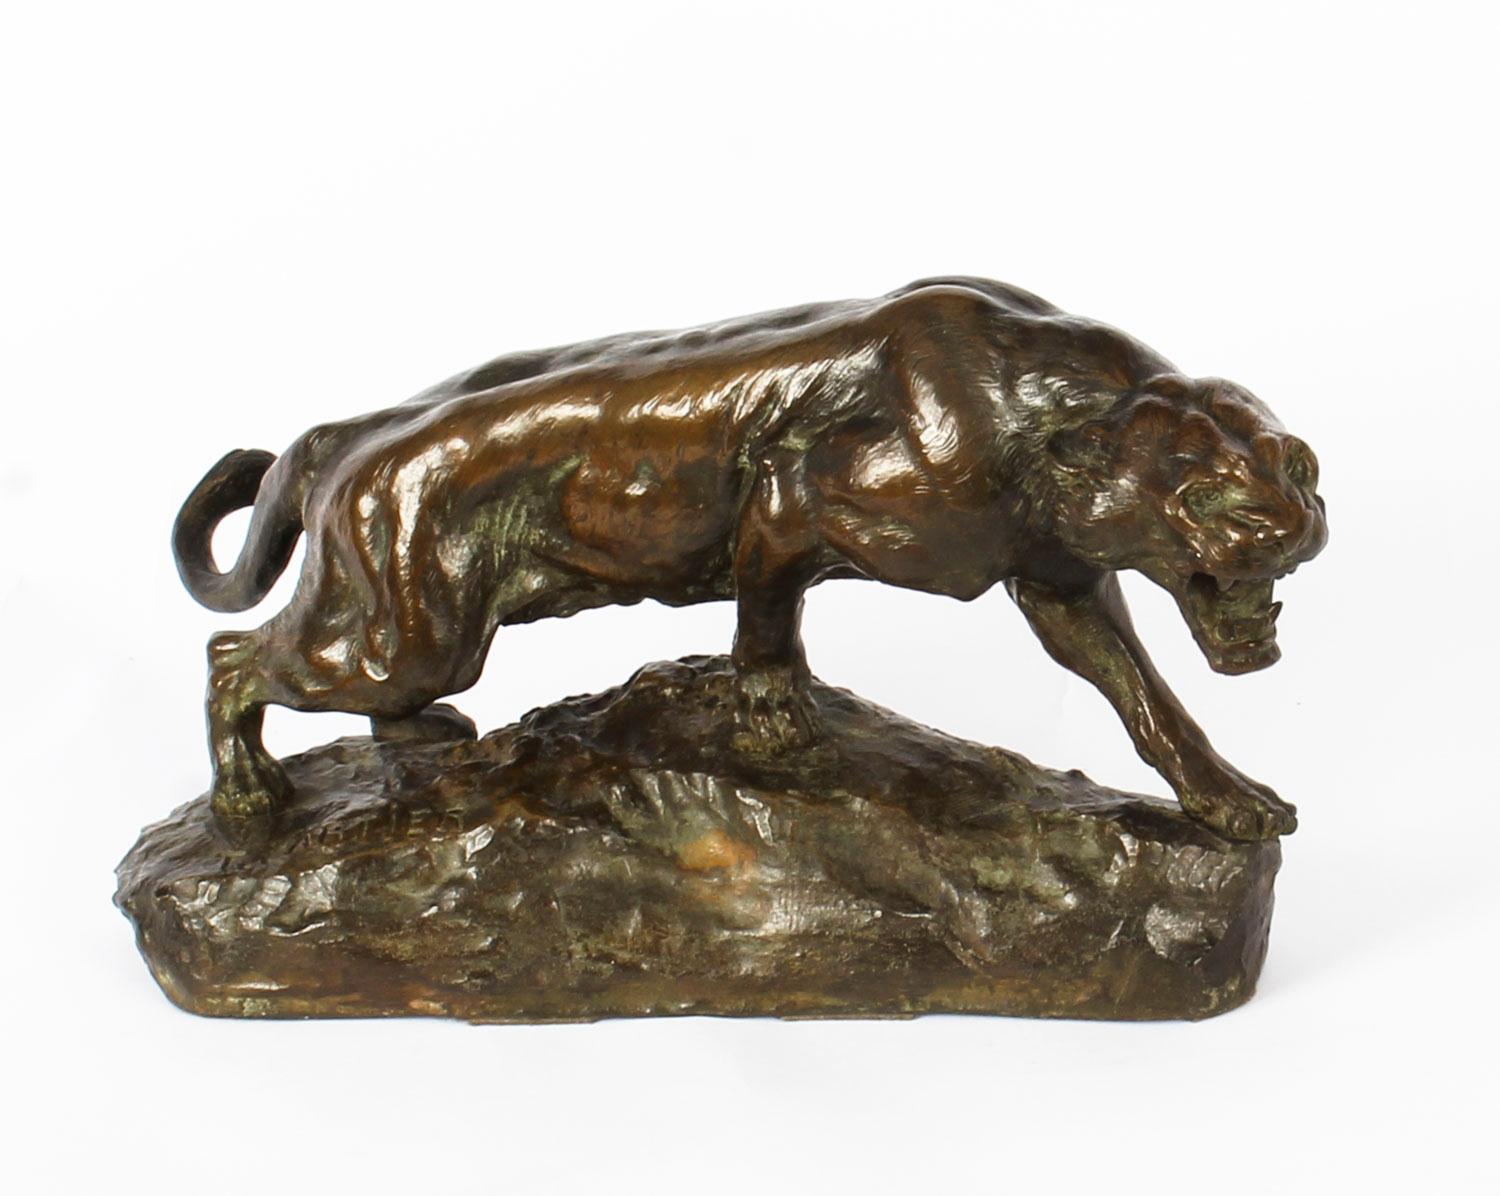 A beautiful large Art Deco patinated bronze study of a crouching tiger, signed Thomas François Cartier (1879-1943) circa 1920 in date.

The finely cast sculpture evokes a crouching tiger in motion with fantastic attention to detail. It has light